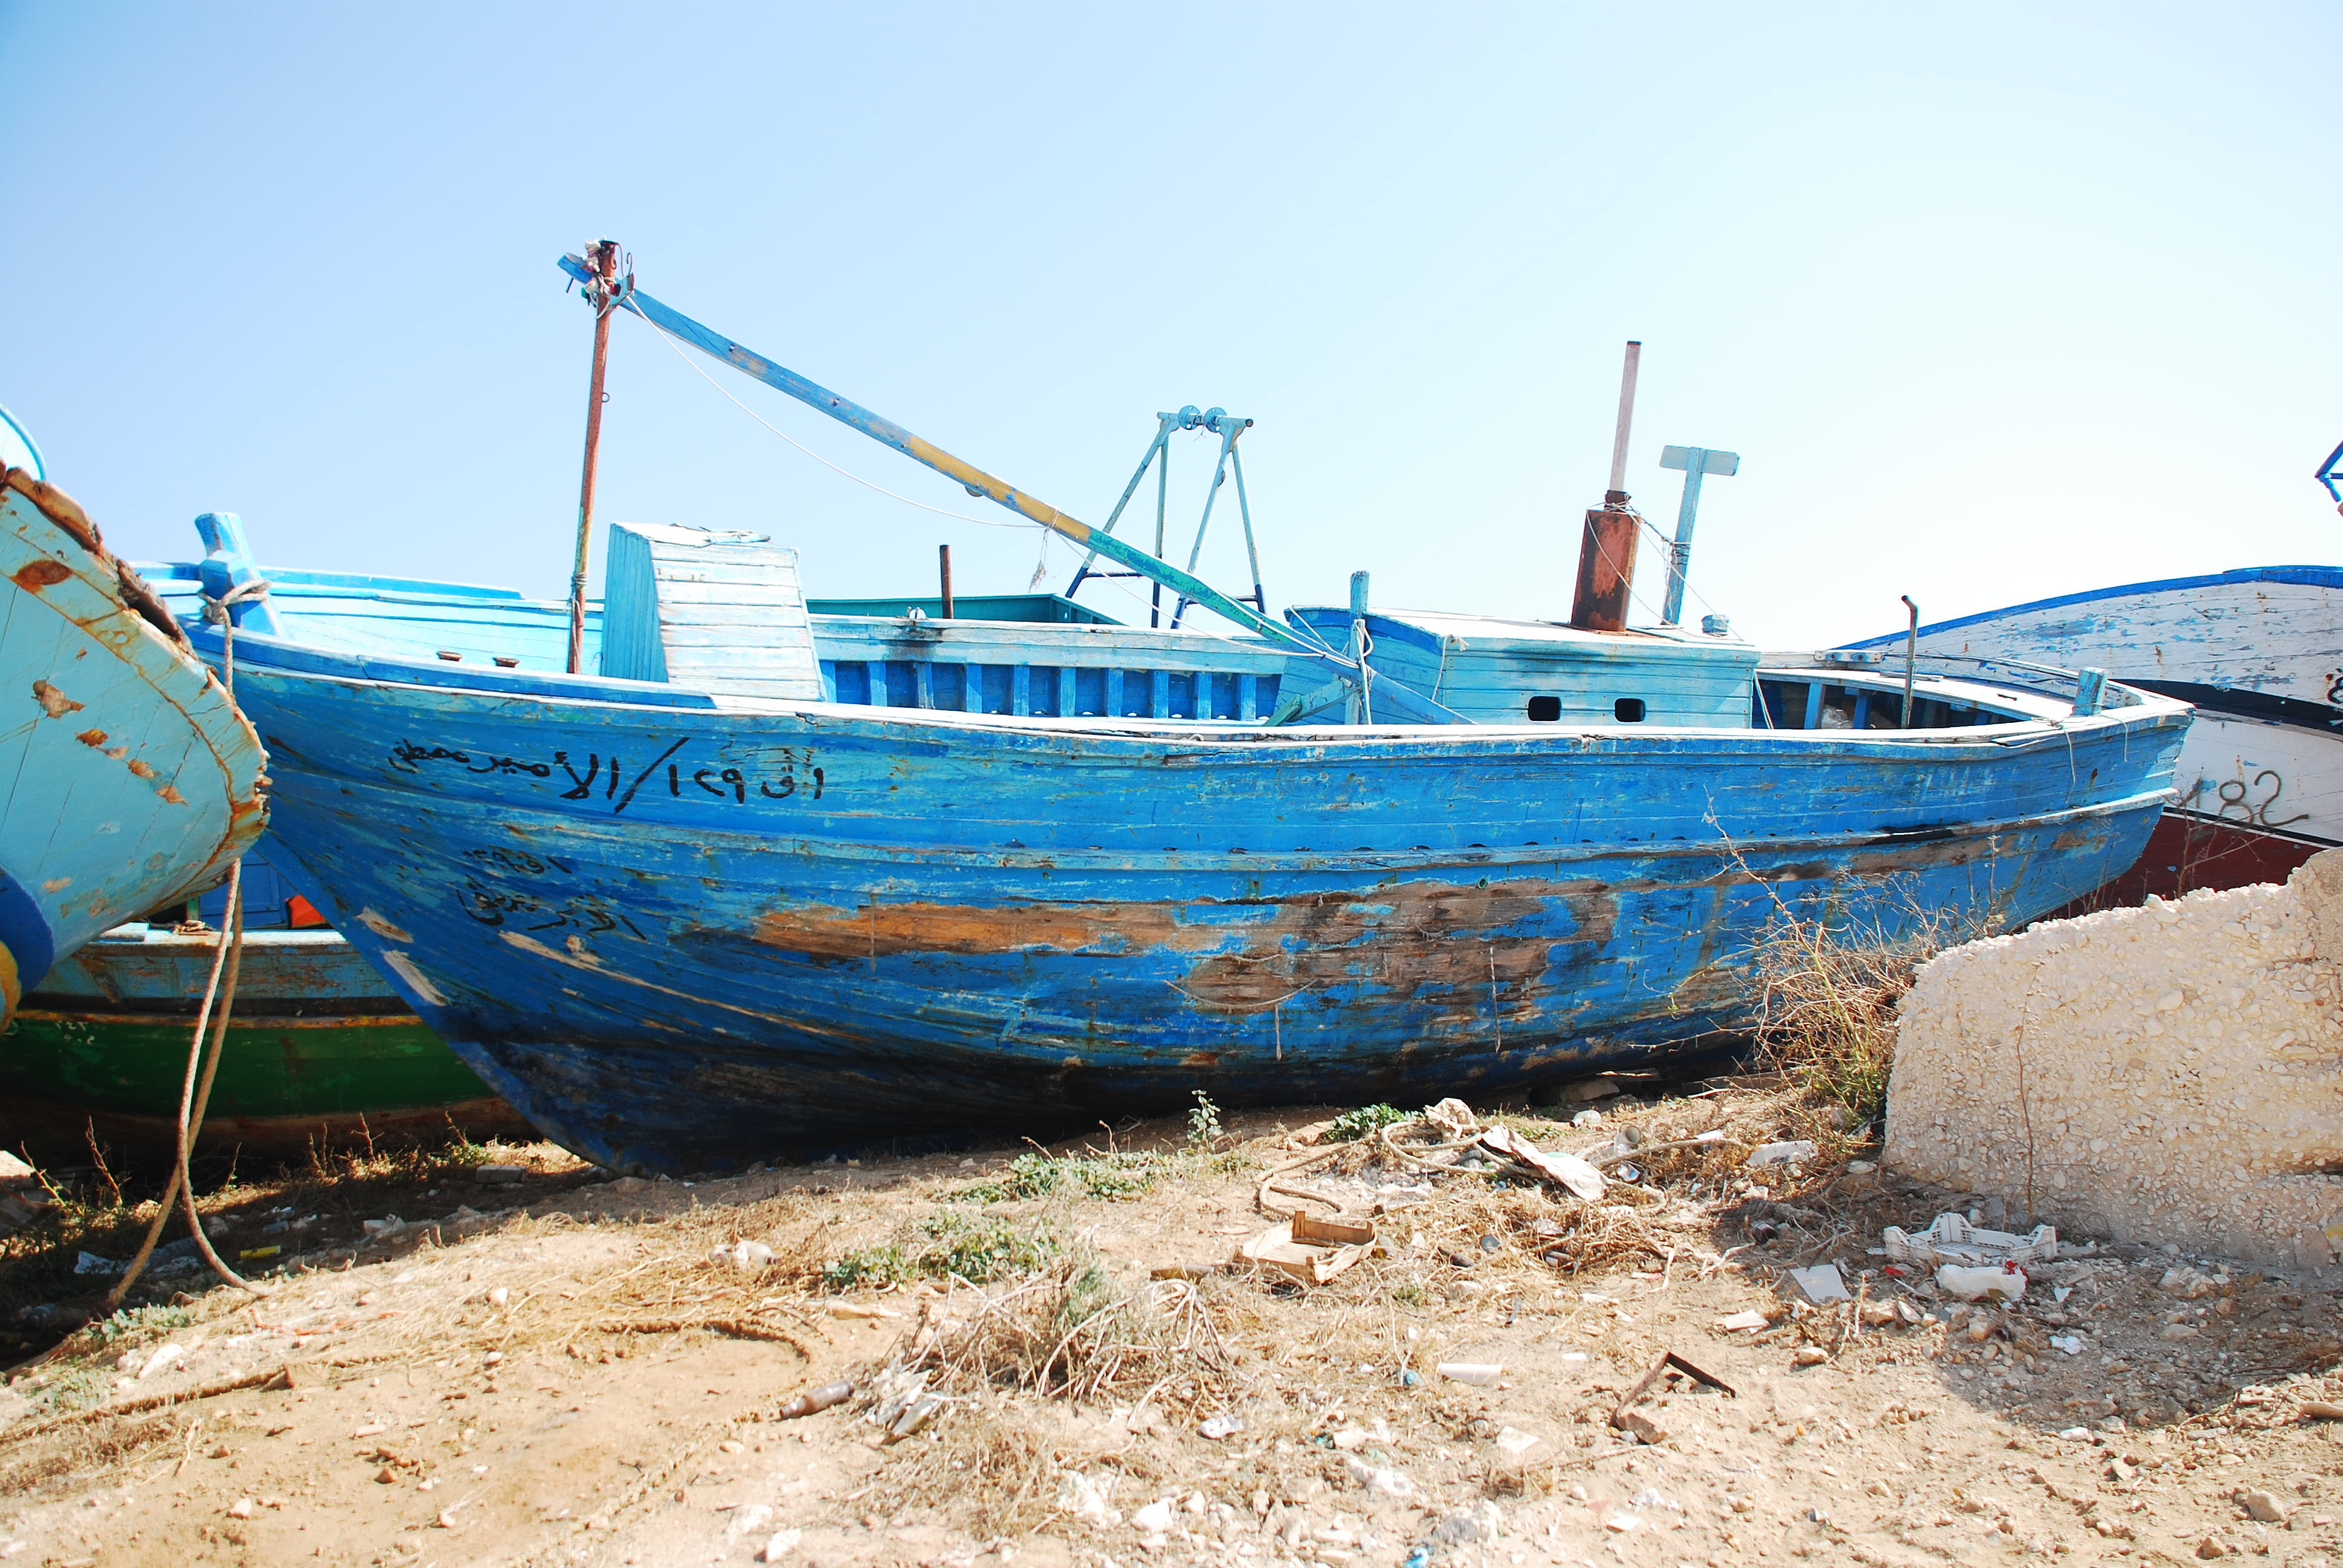 Sicily's Refugees' Boats Graveyard – Stanito